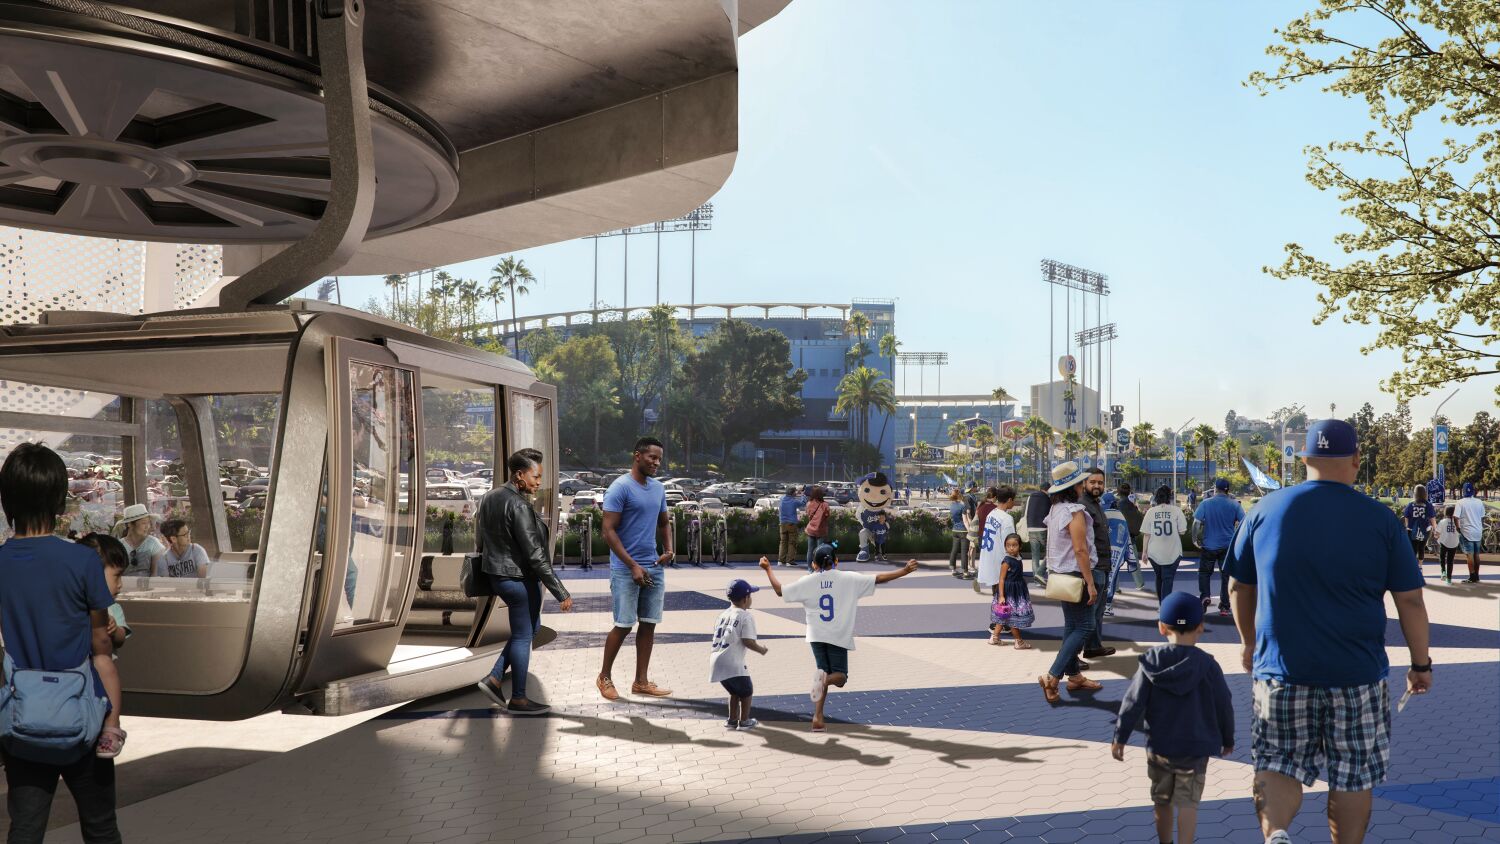 A gondola to Dodger Stadium? 'Repulsive,' among reader thoughts